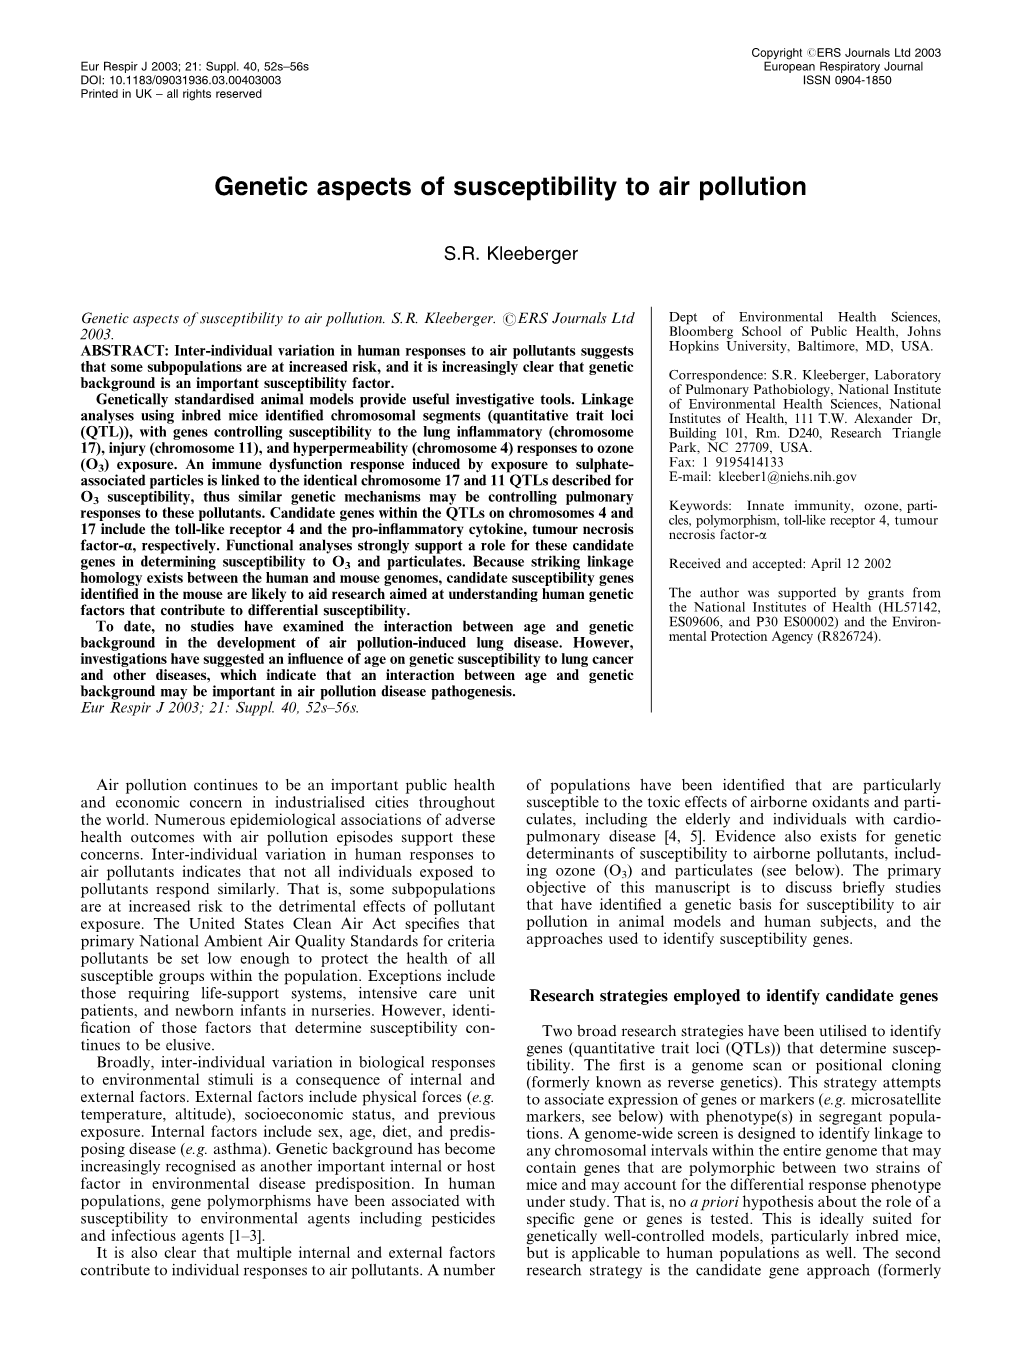 Genetic Aspects of Susceptibility to Air Pollution